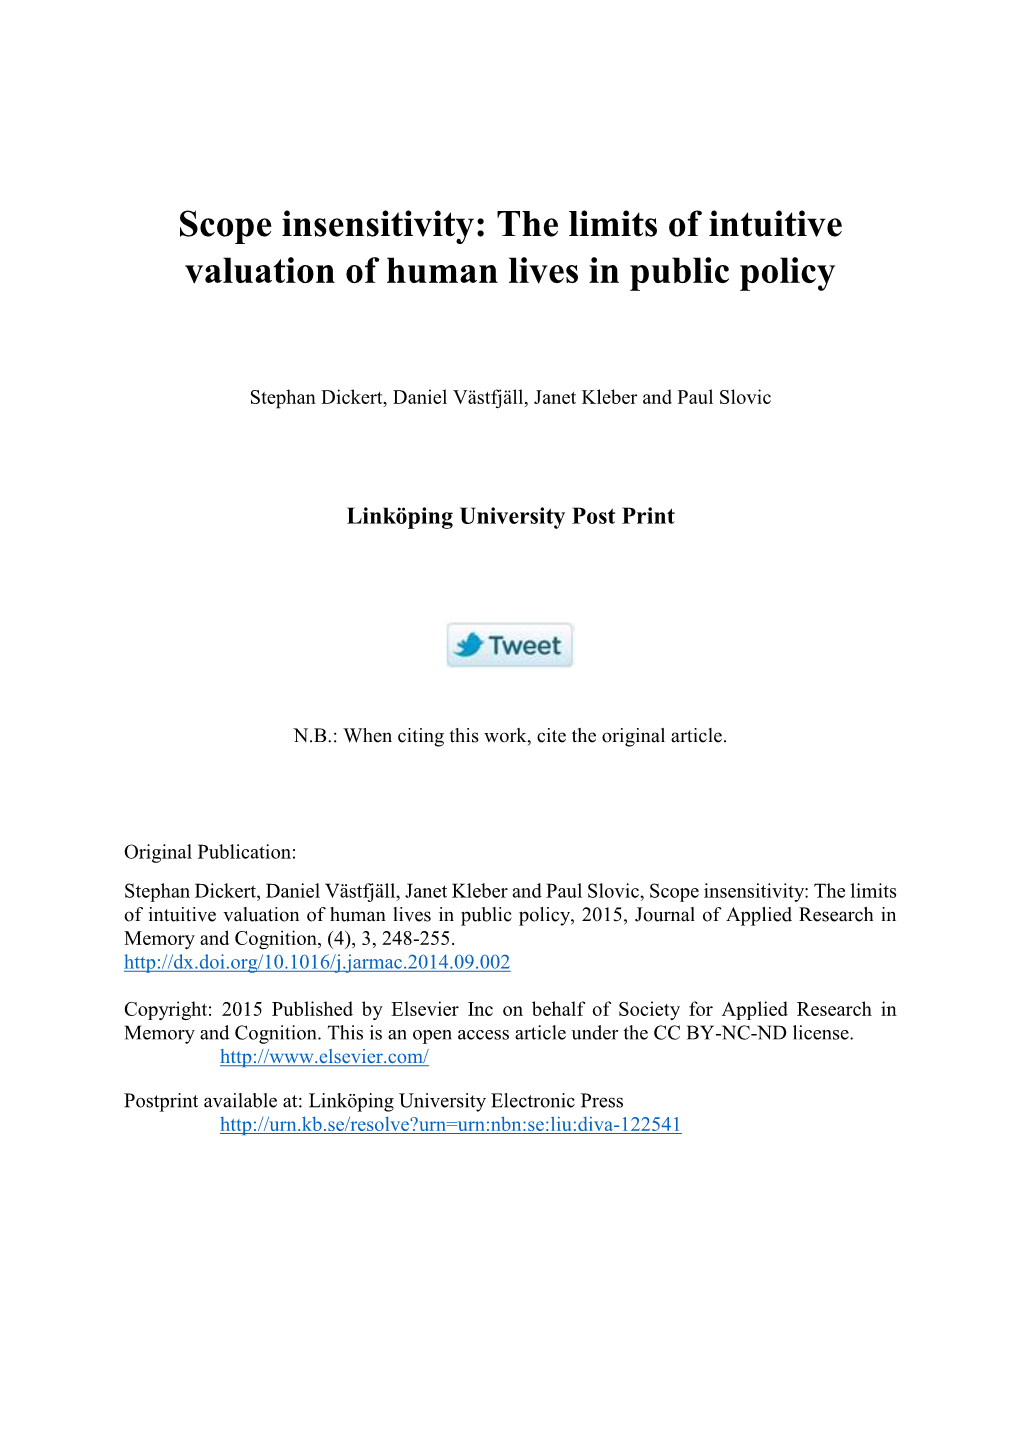 Scope Insensitivity: the Limits of Intuitive Valuation of Human Lives in Public Policy